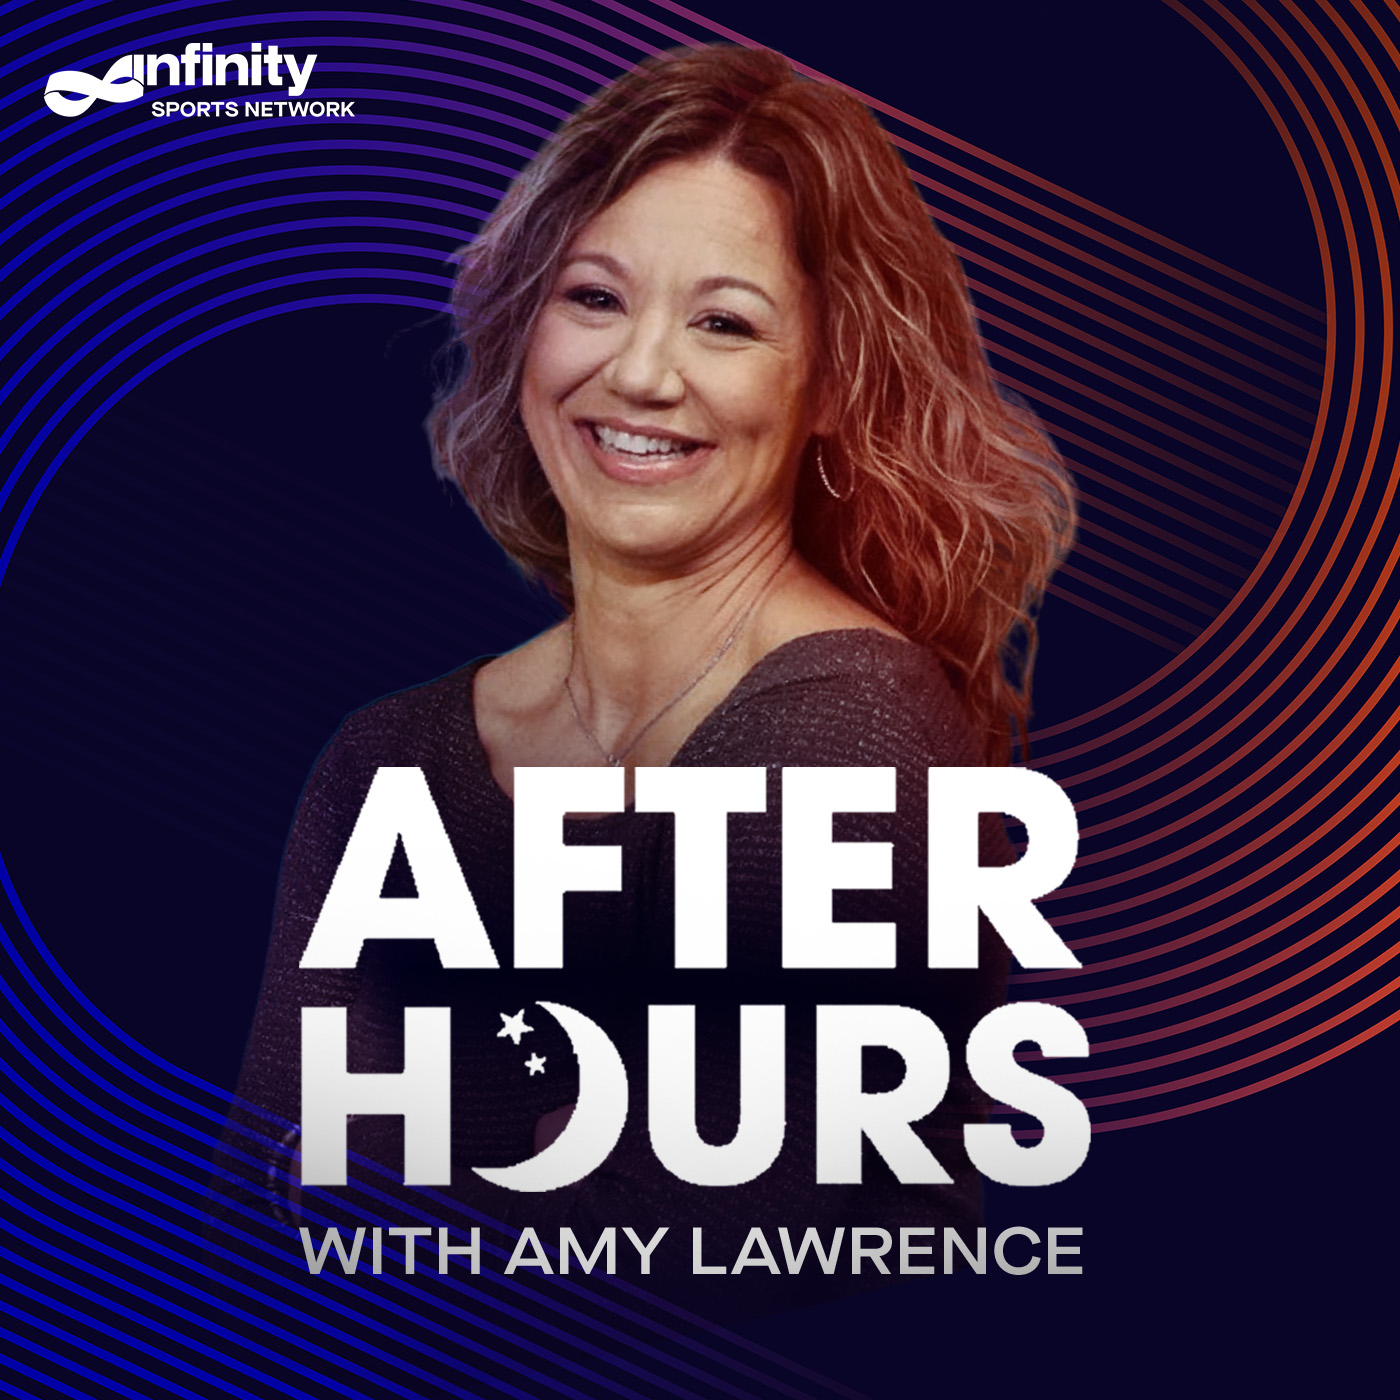 1-26-22 After Hours with Amy Lawrence PODCAST: Hour 3